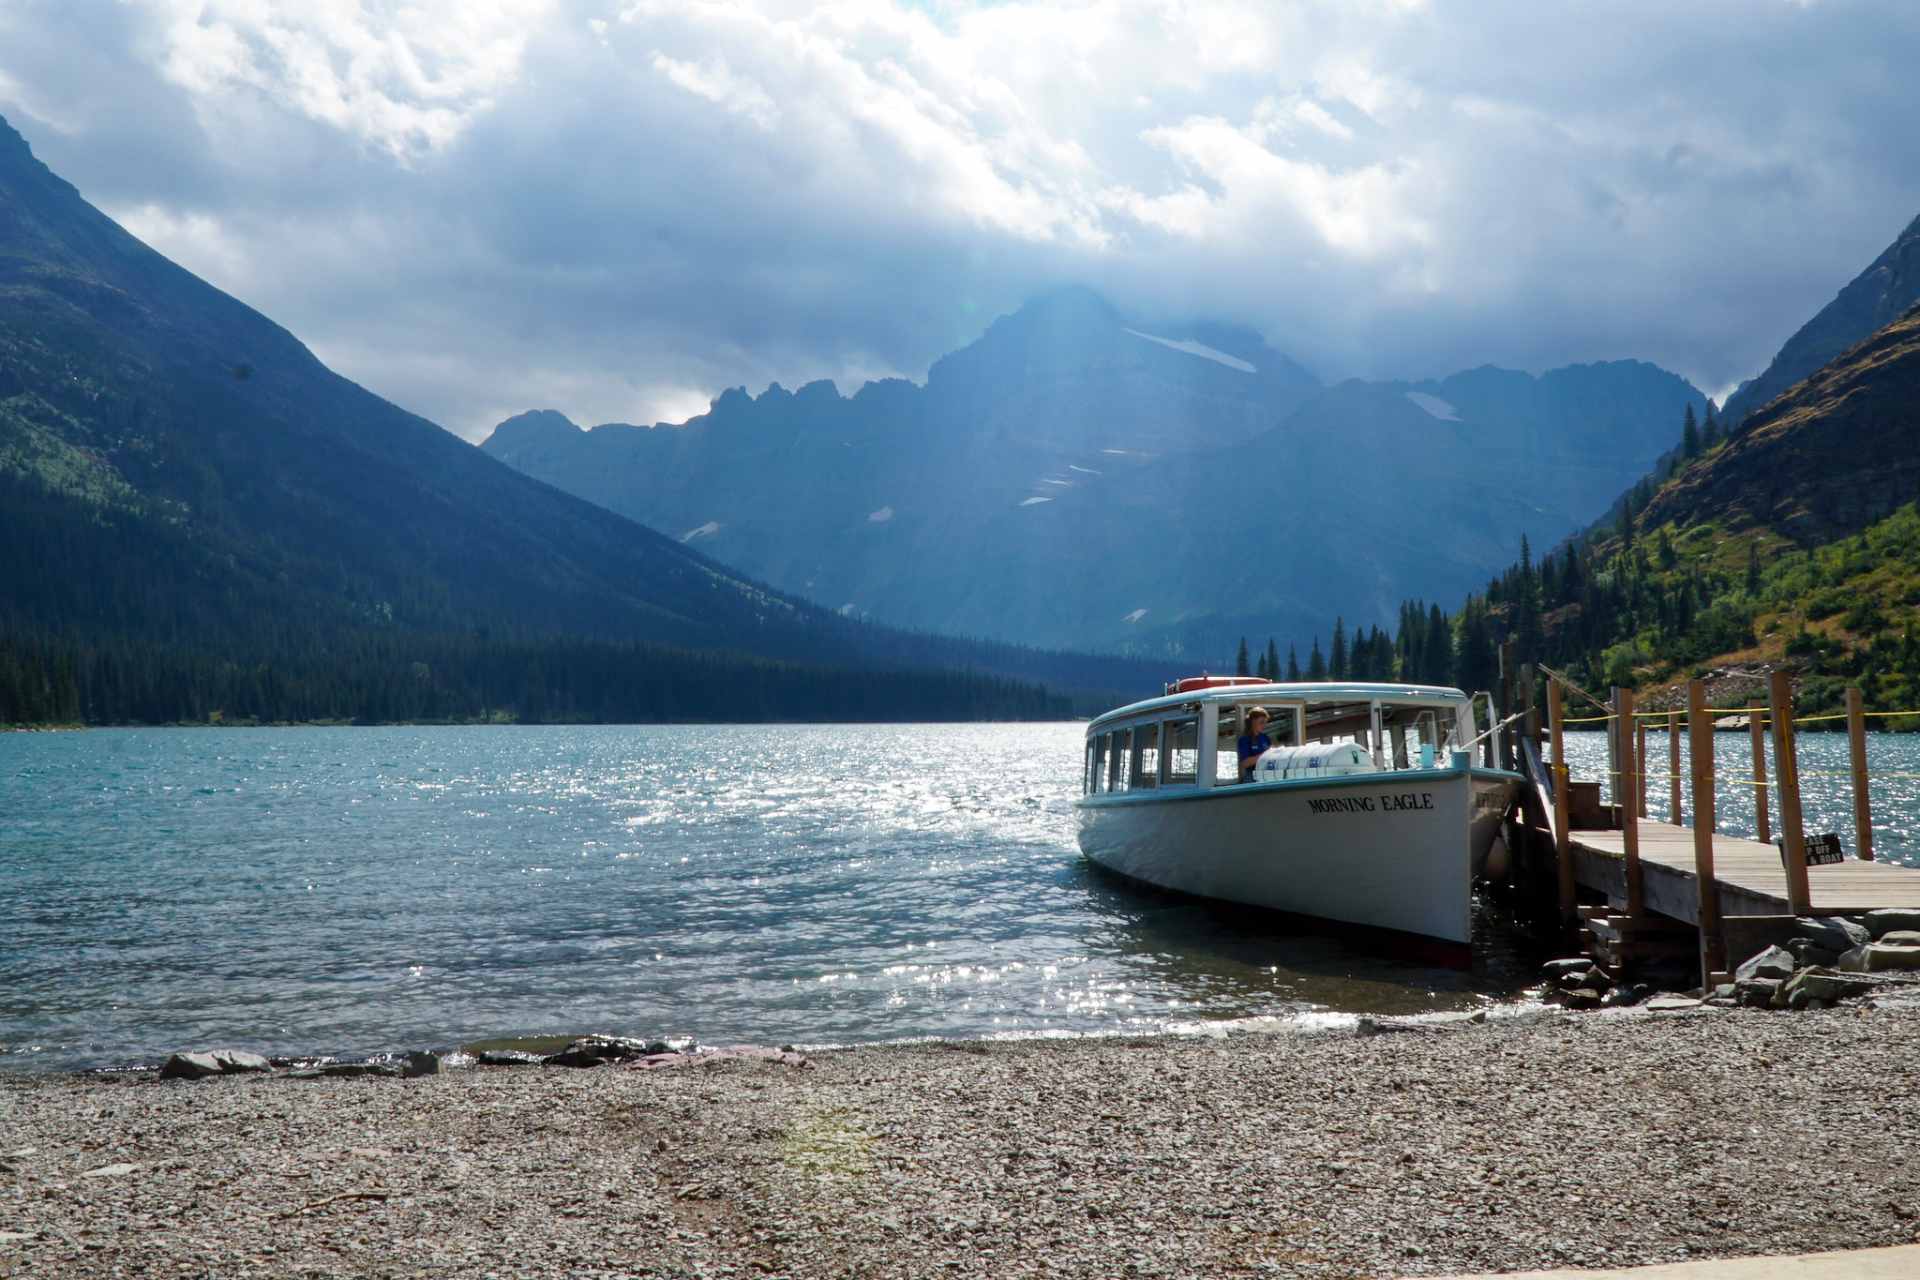 Historic tour boat on a lake shore in Glacier National Park